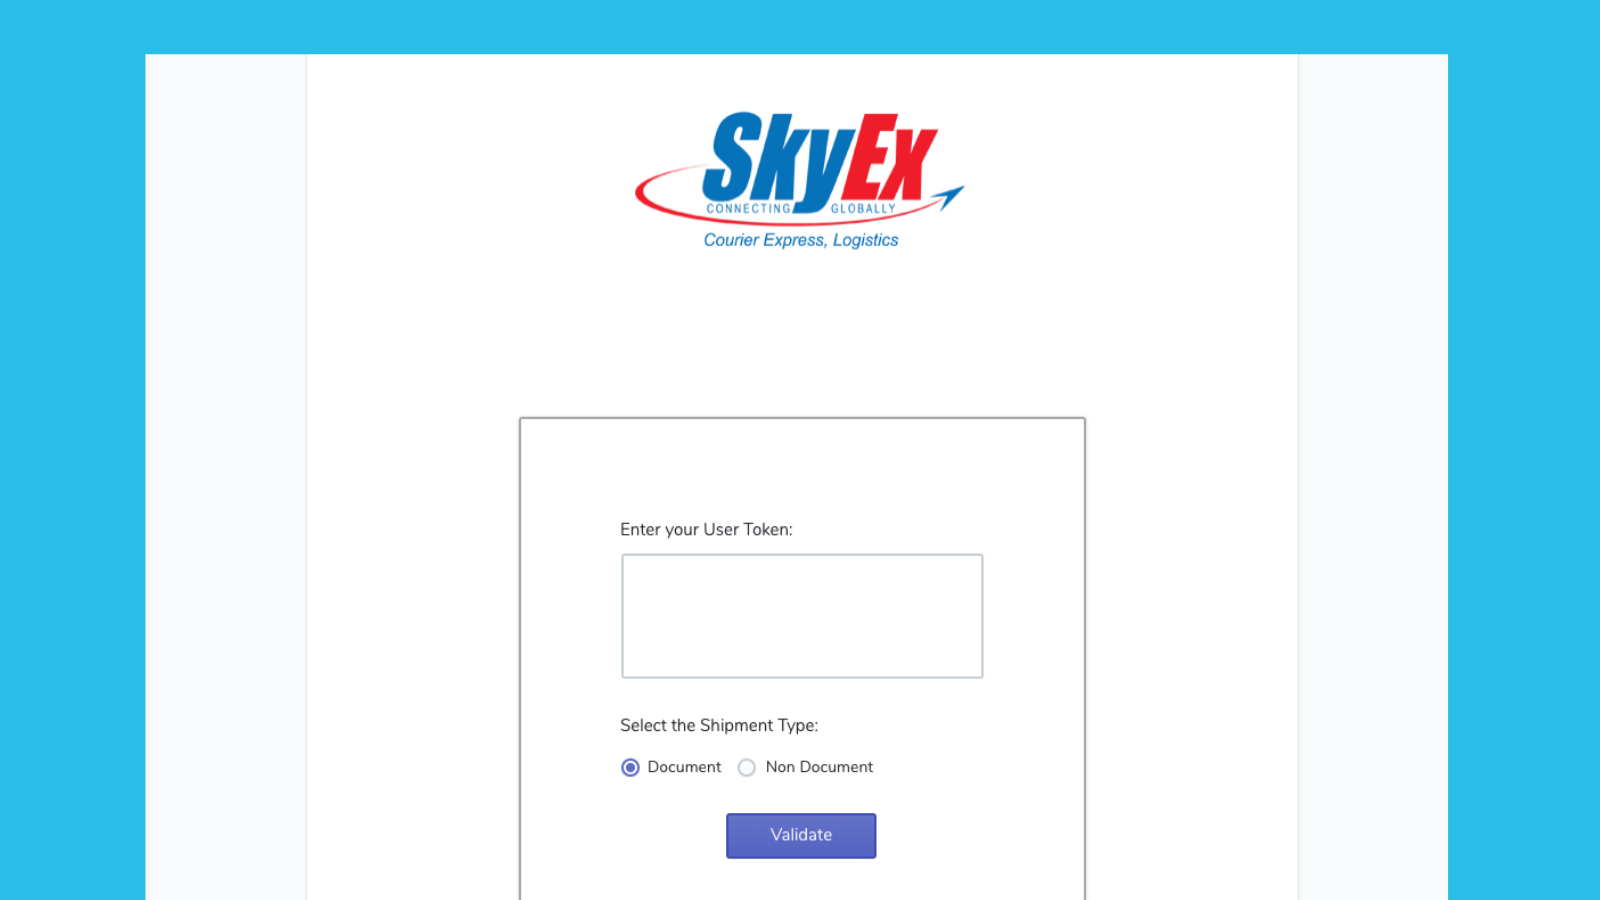 Enter your unique User Token received from SkyEx Courier.